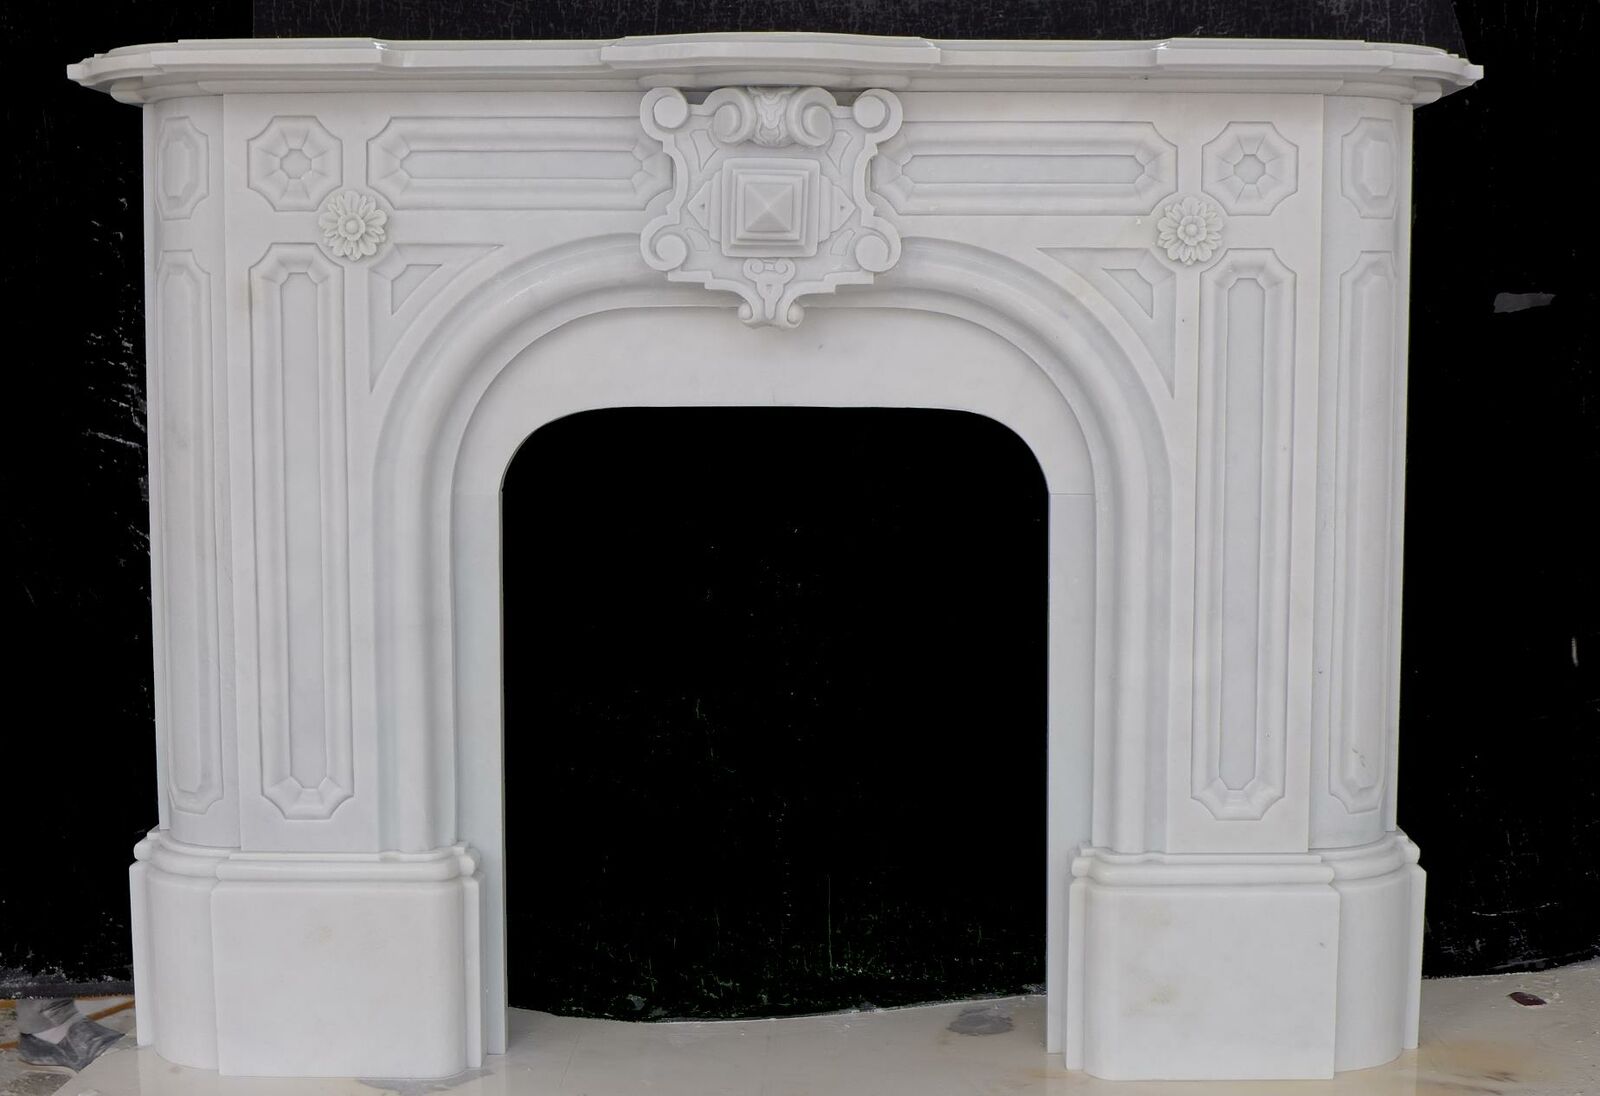 BEAUTIFUL VICTORIAN STYLE HAND CARVED MARBLE FIREPLACE MANTEL - RL1